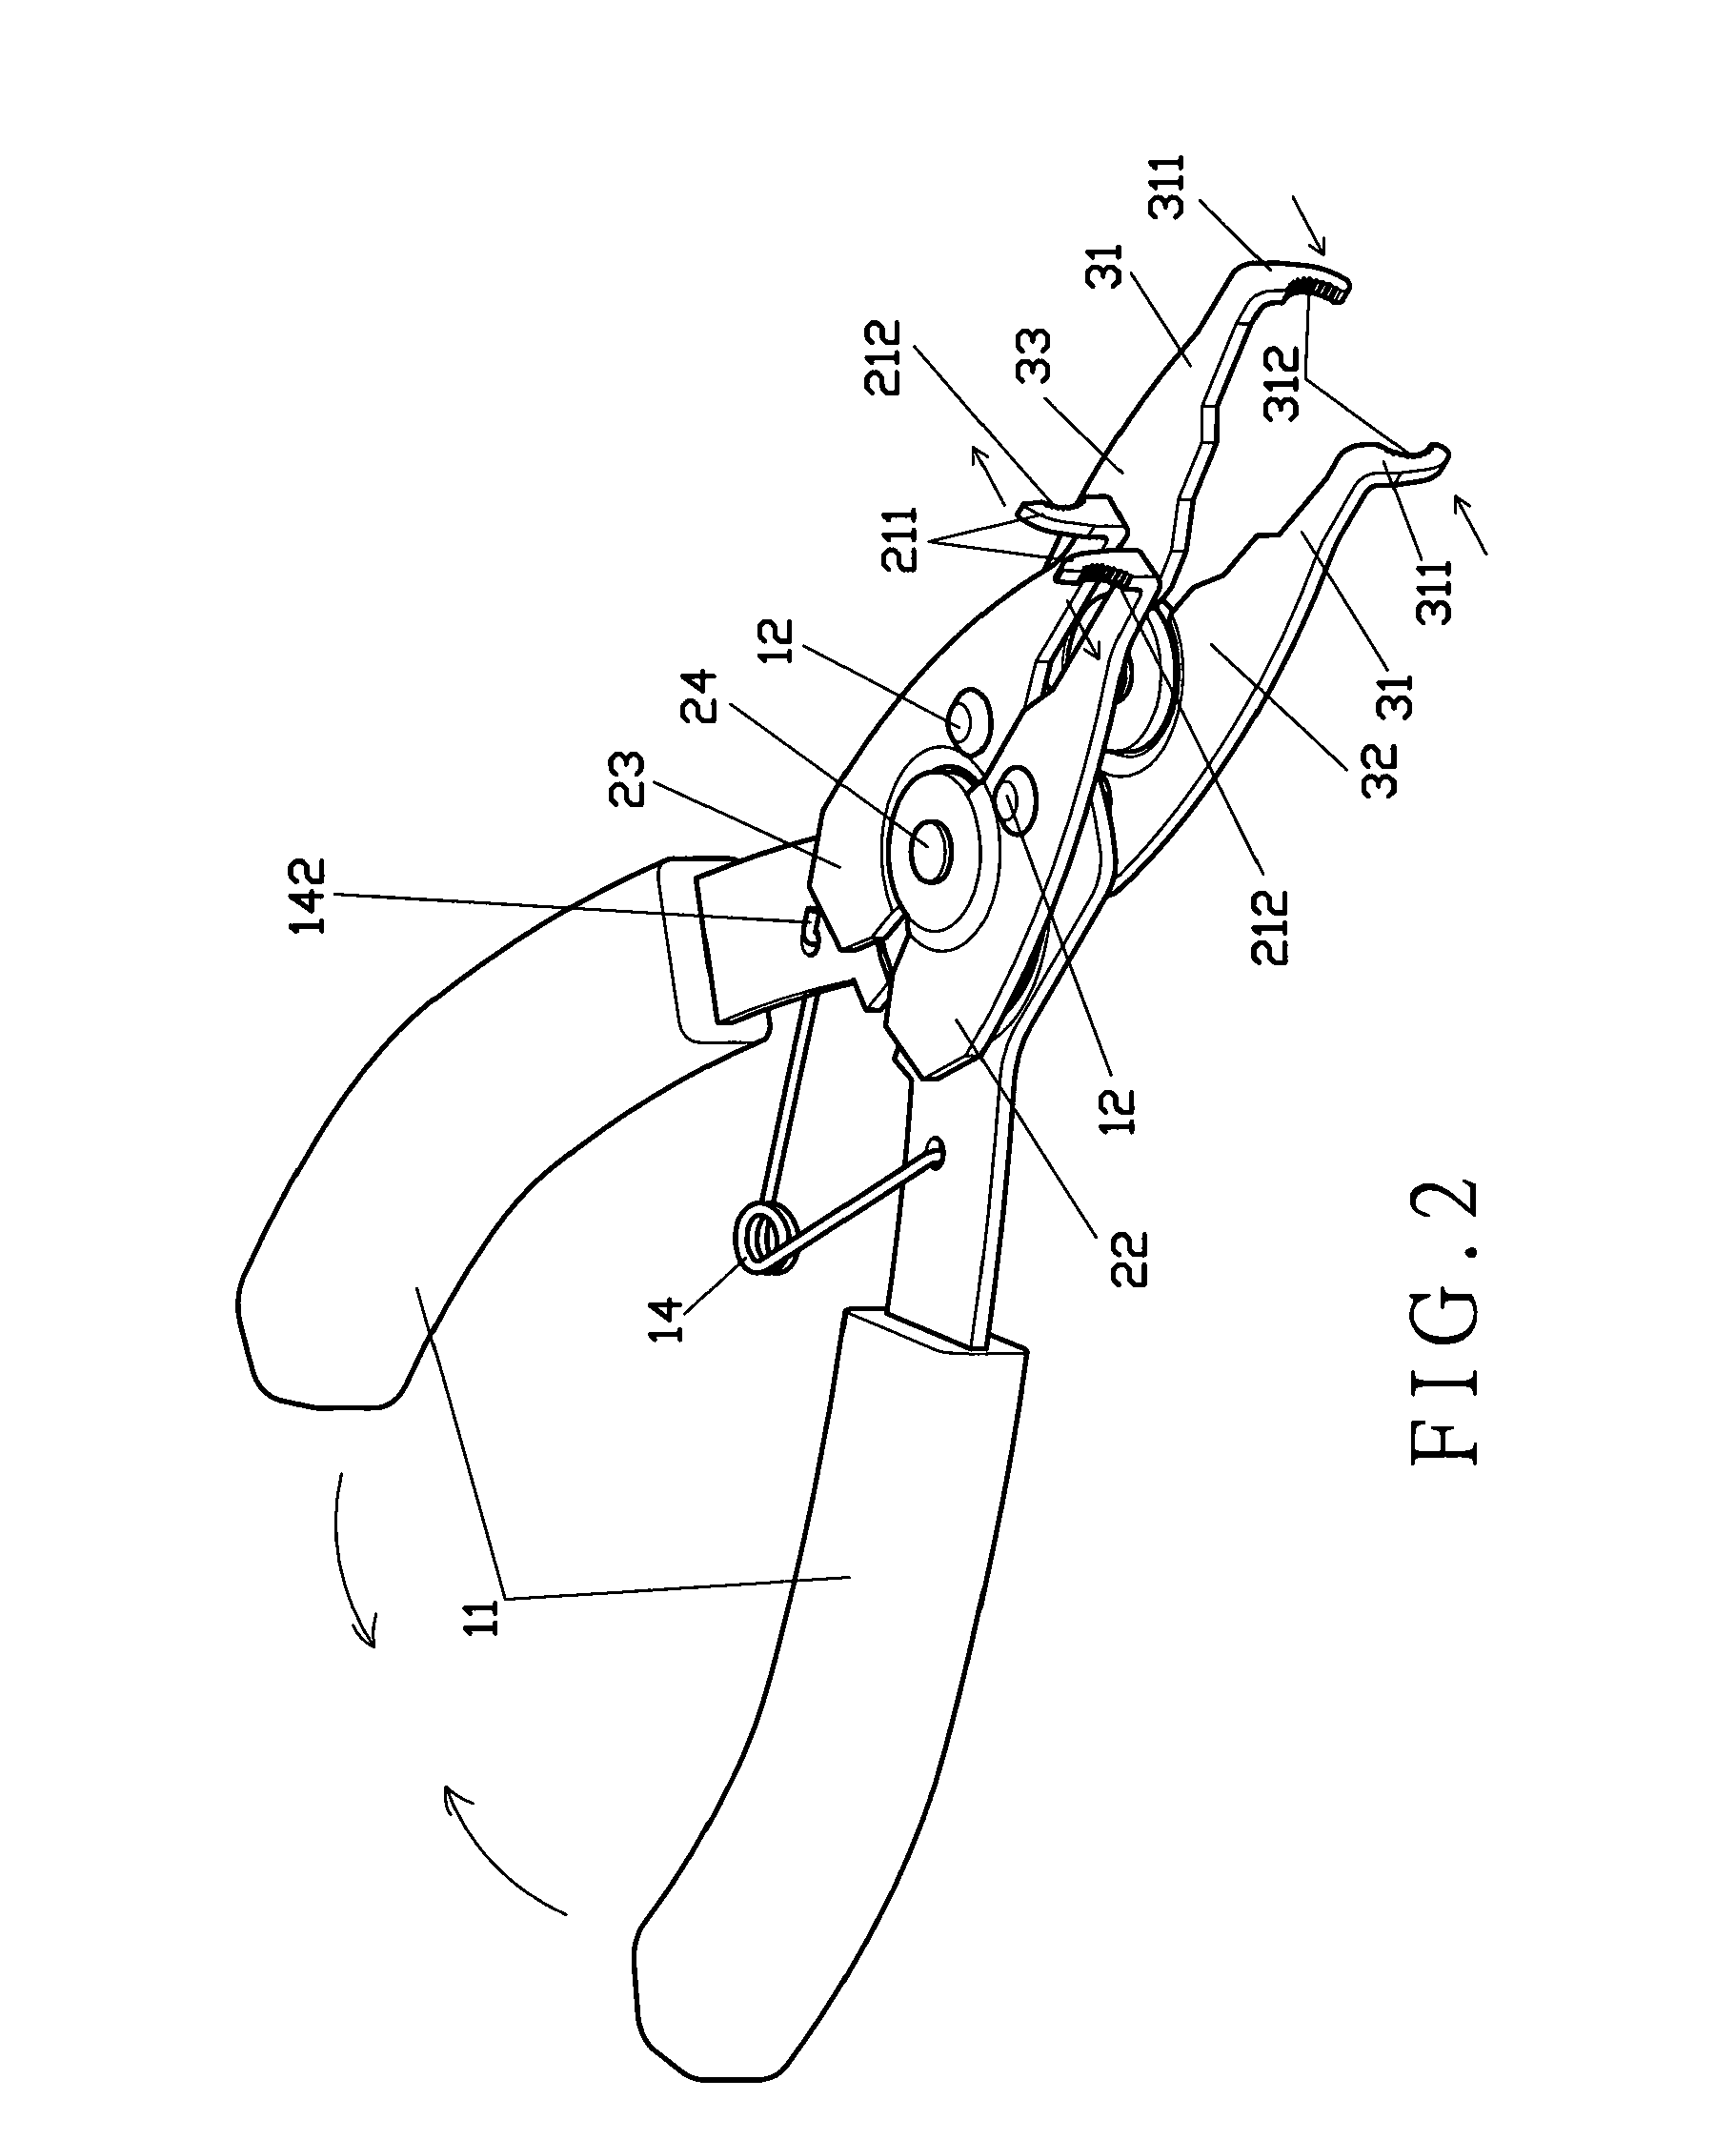 Dual-purpose pliers adapted to chain link